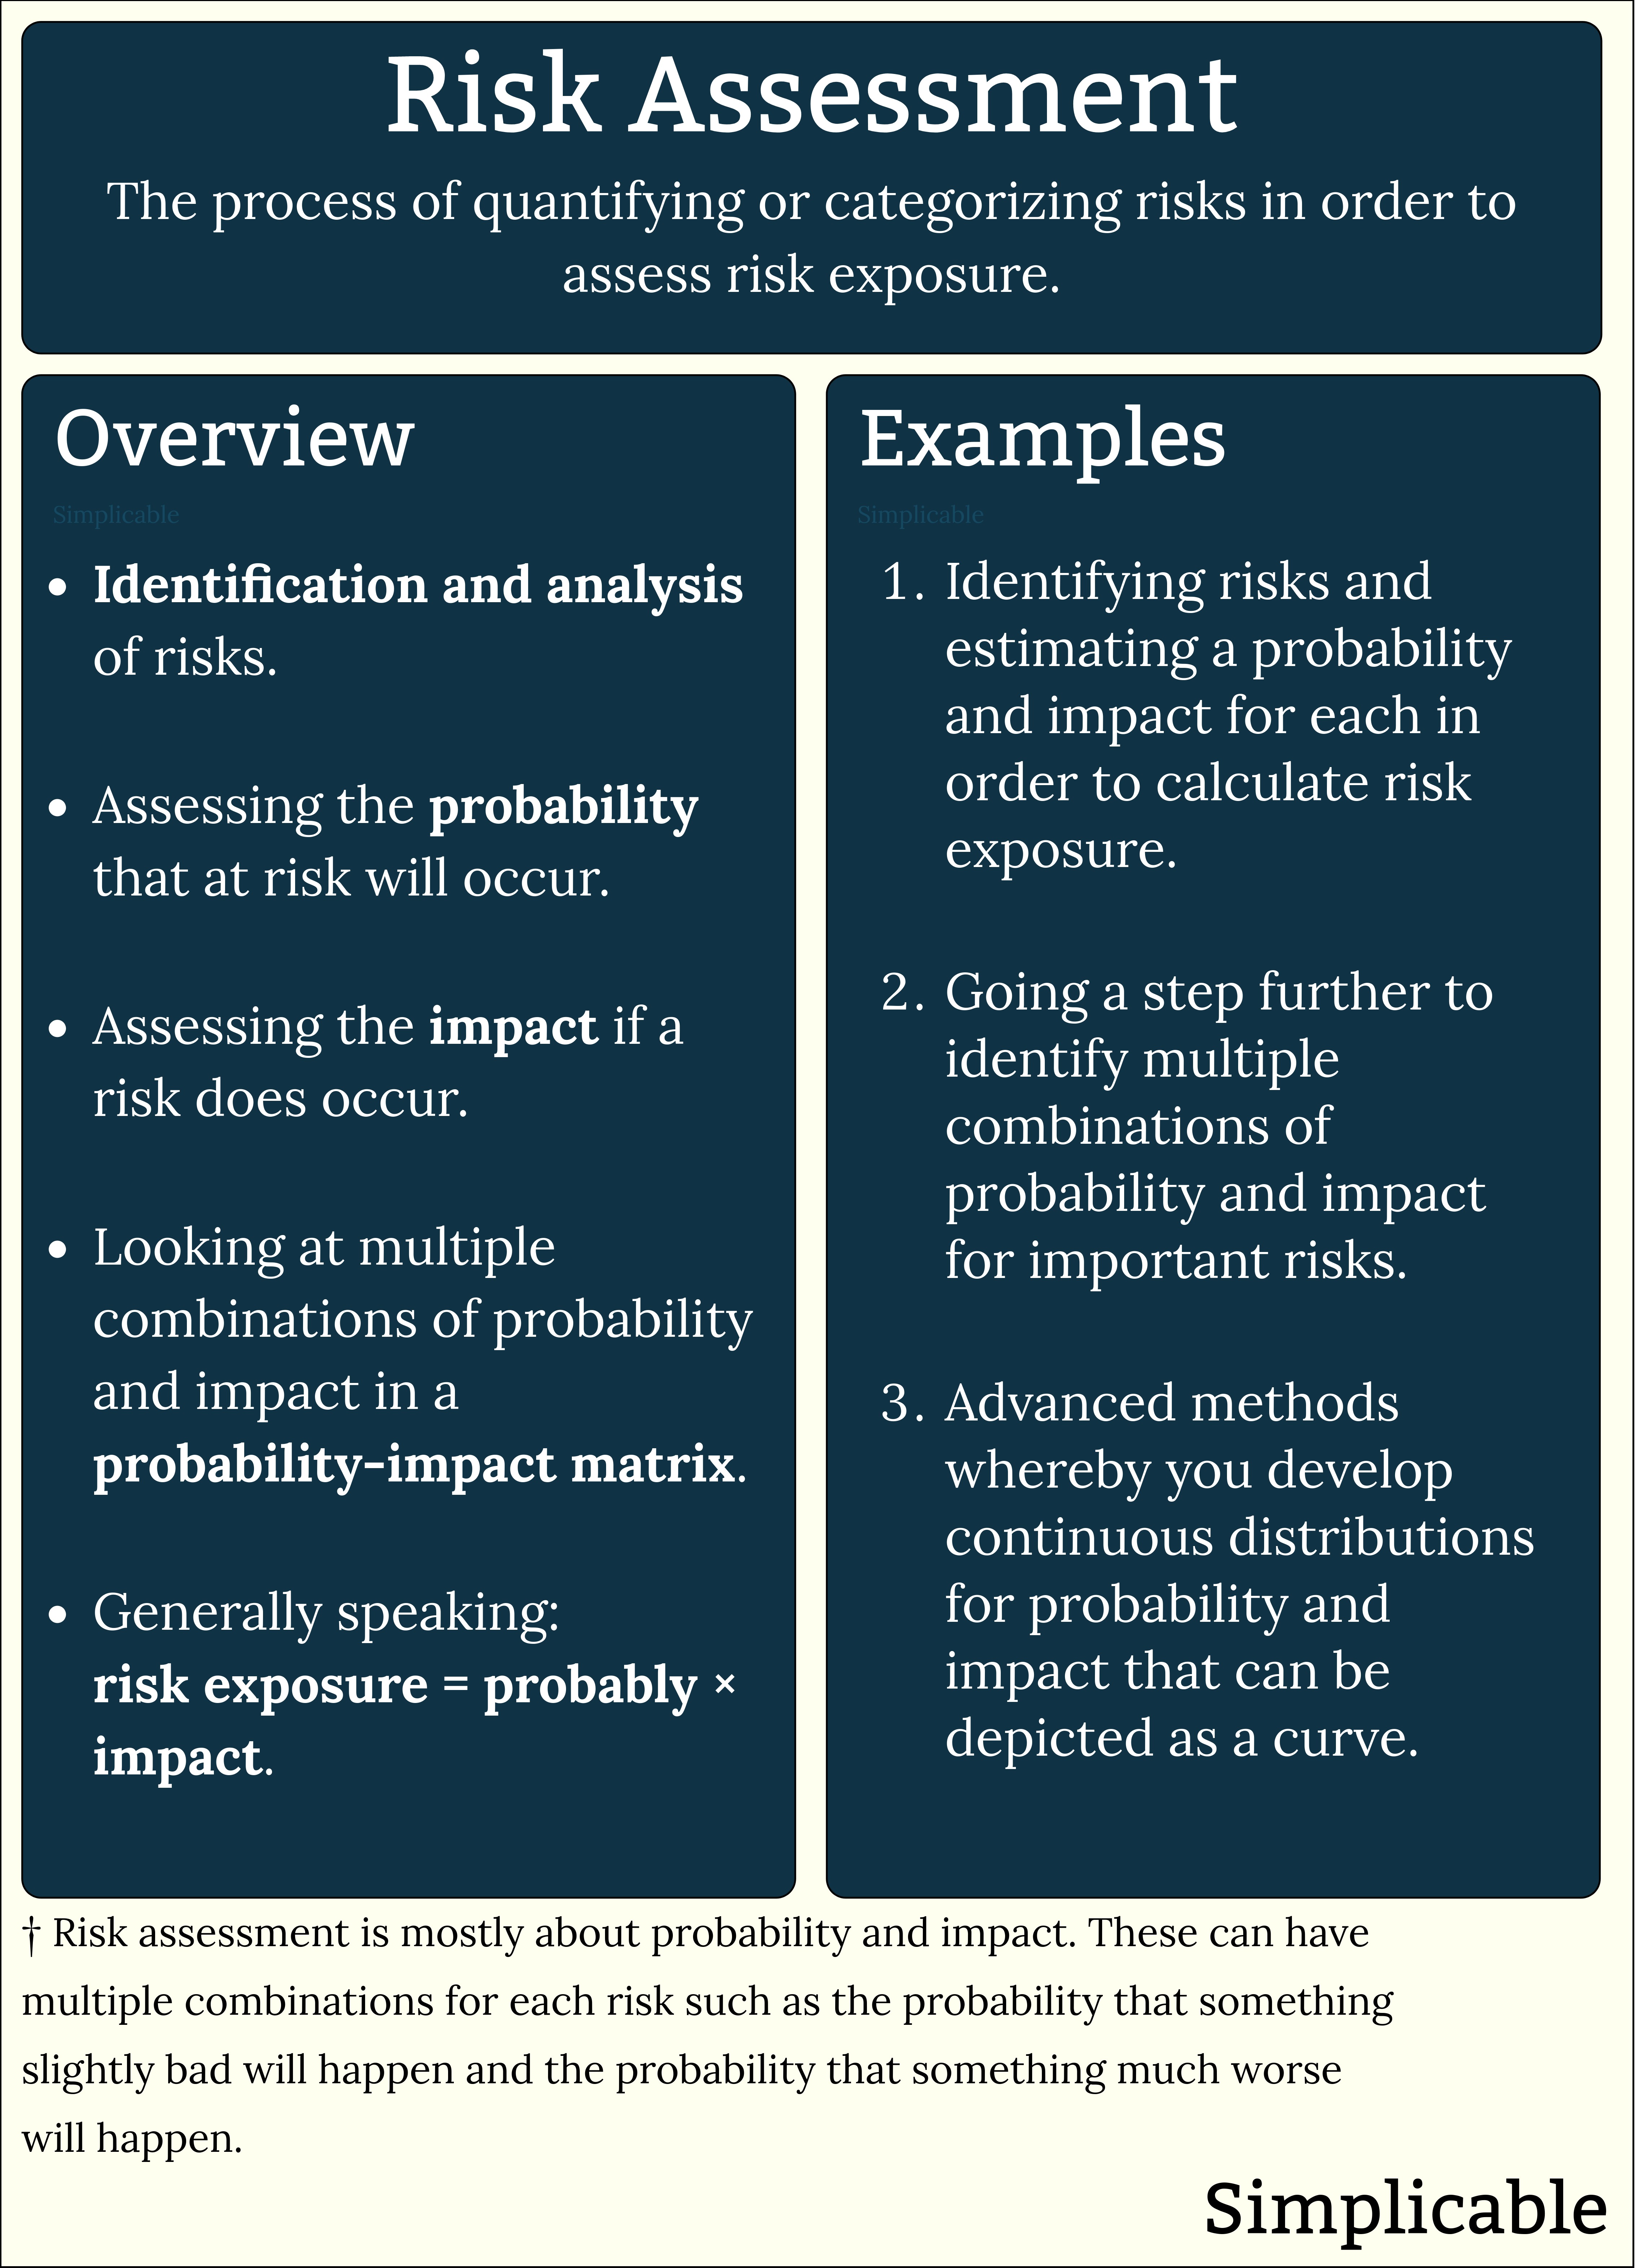 risk assessment overview and examples